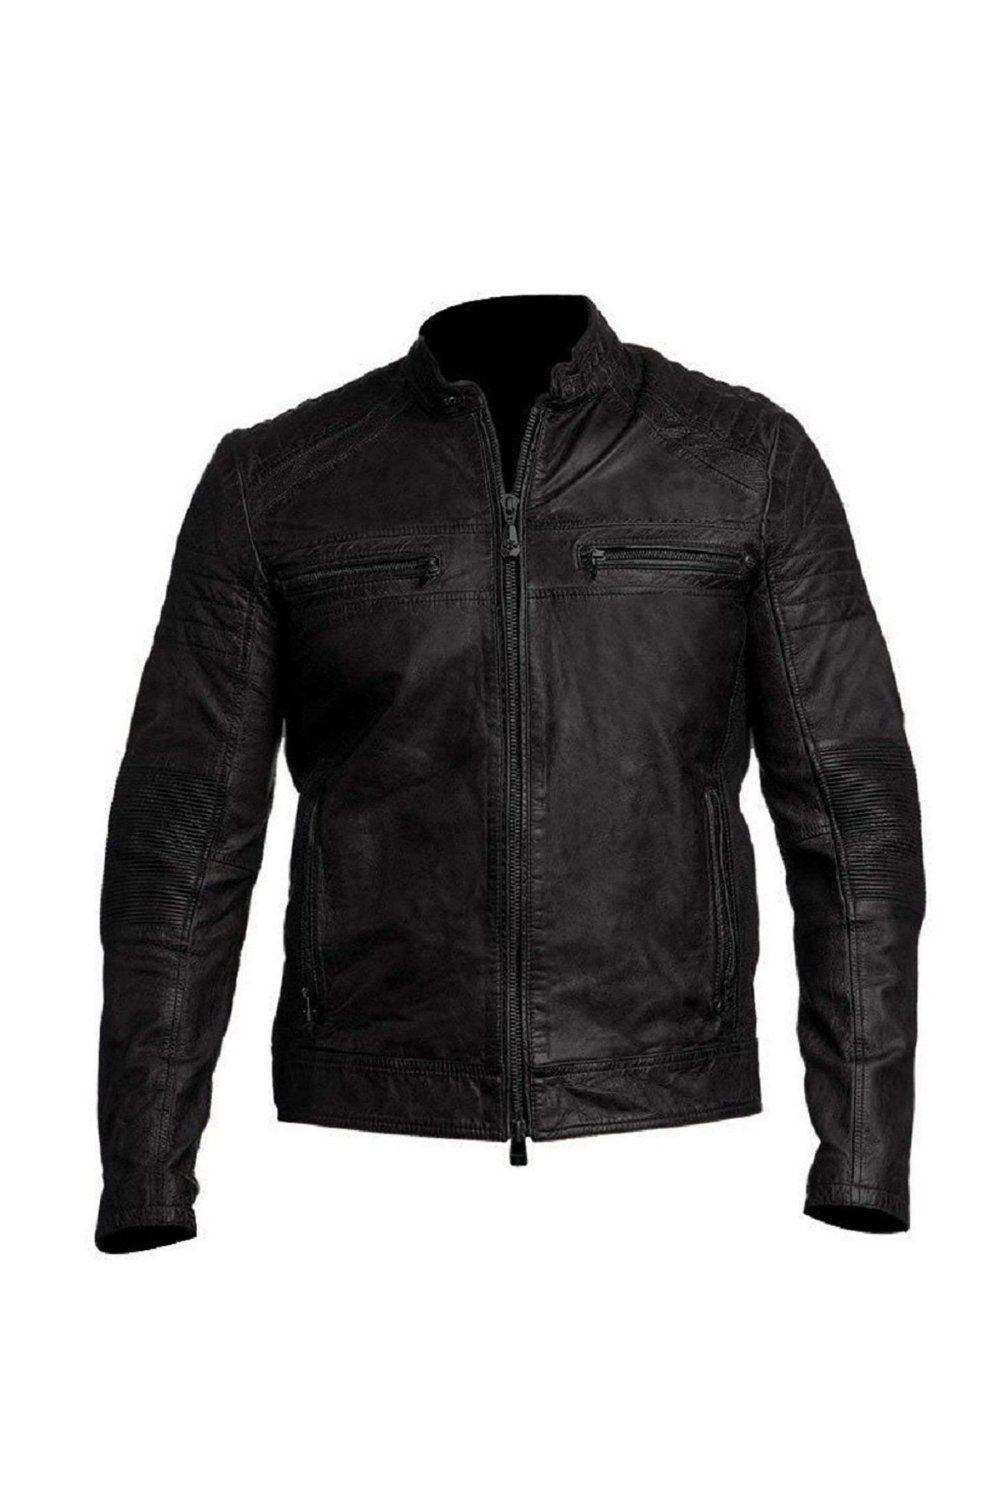 Men's Black Cafe Racer Style Real Leather Jacket | Throblife